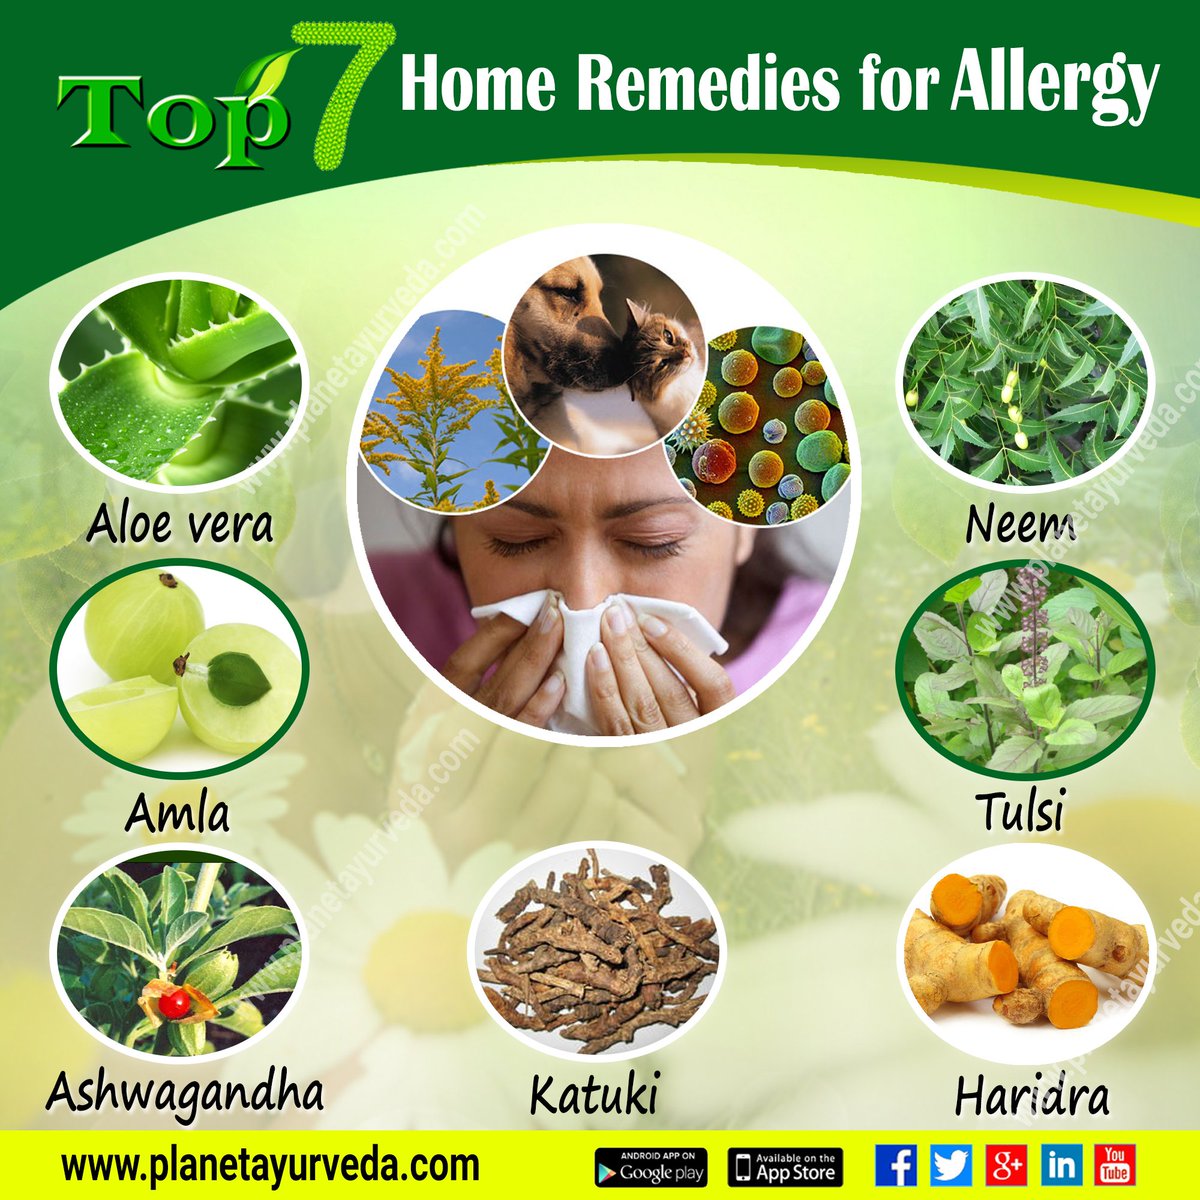 Allergy relief and management